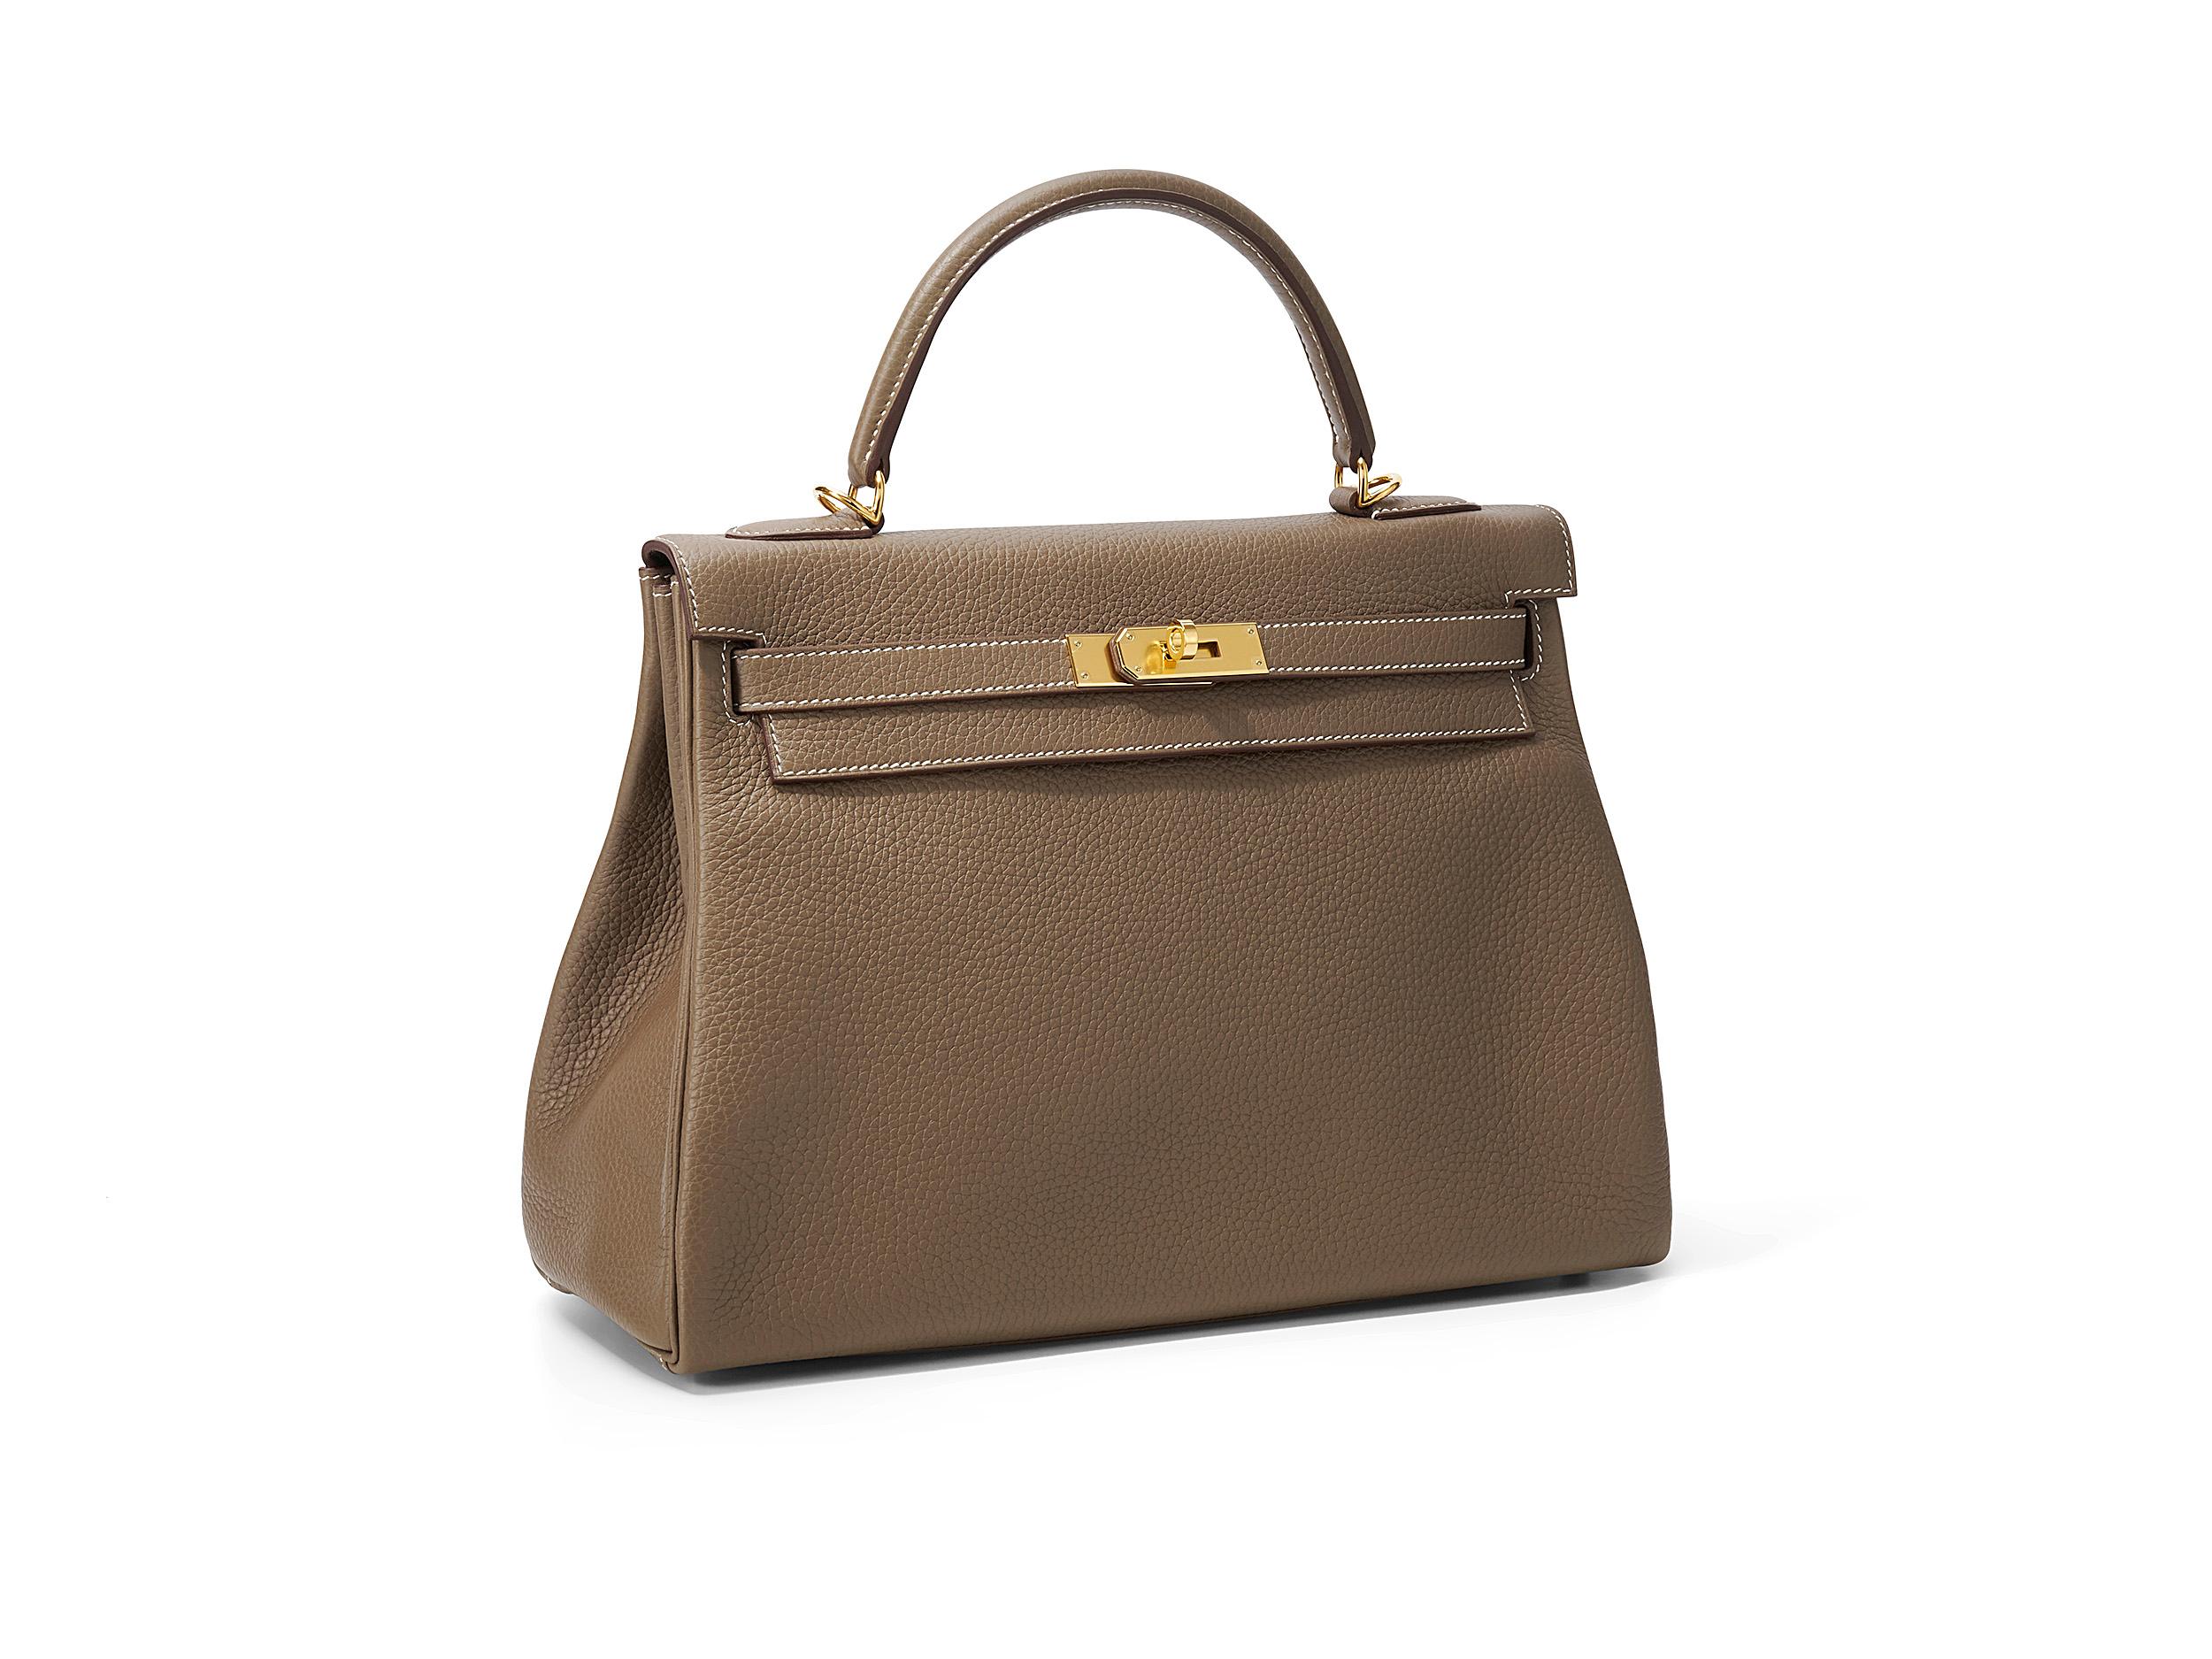 Hermès Kelly 32 in etoupe and taurillon clemence leather with gold hardware. The bag is unworn but has a minor scratch on one corner at the bottom and comes as full set.

Stamp Y (2020) 

